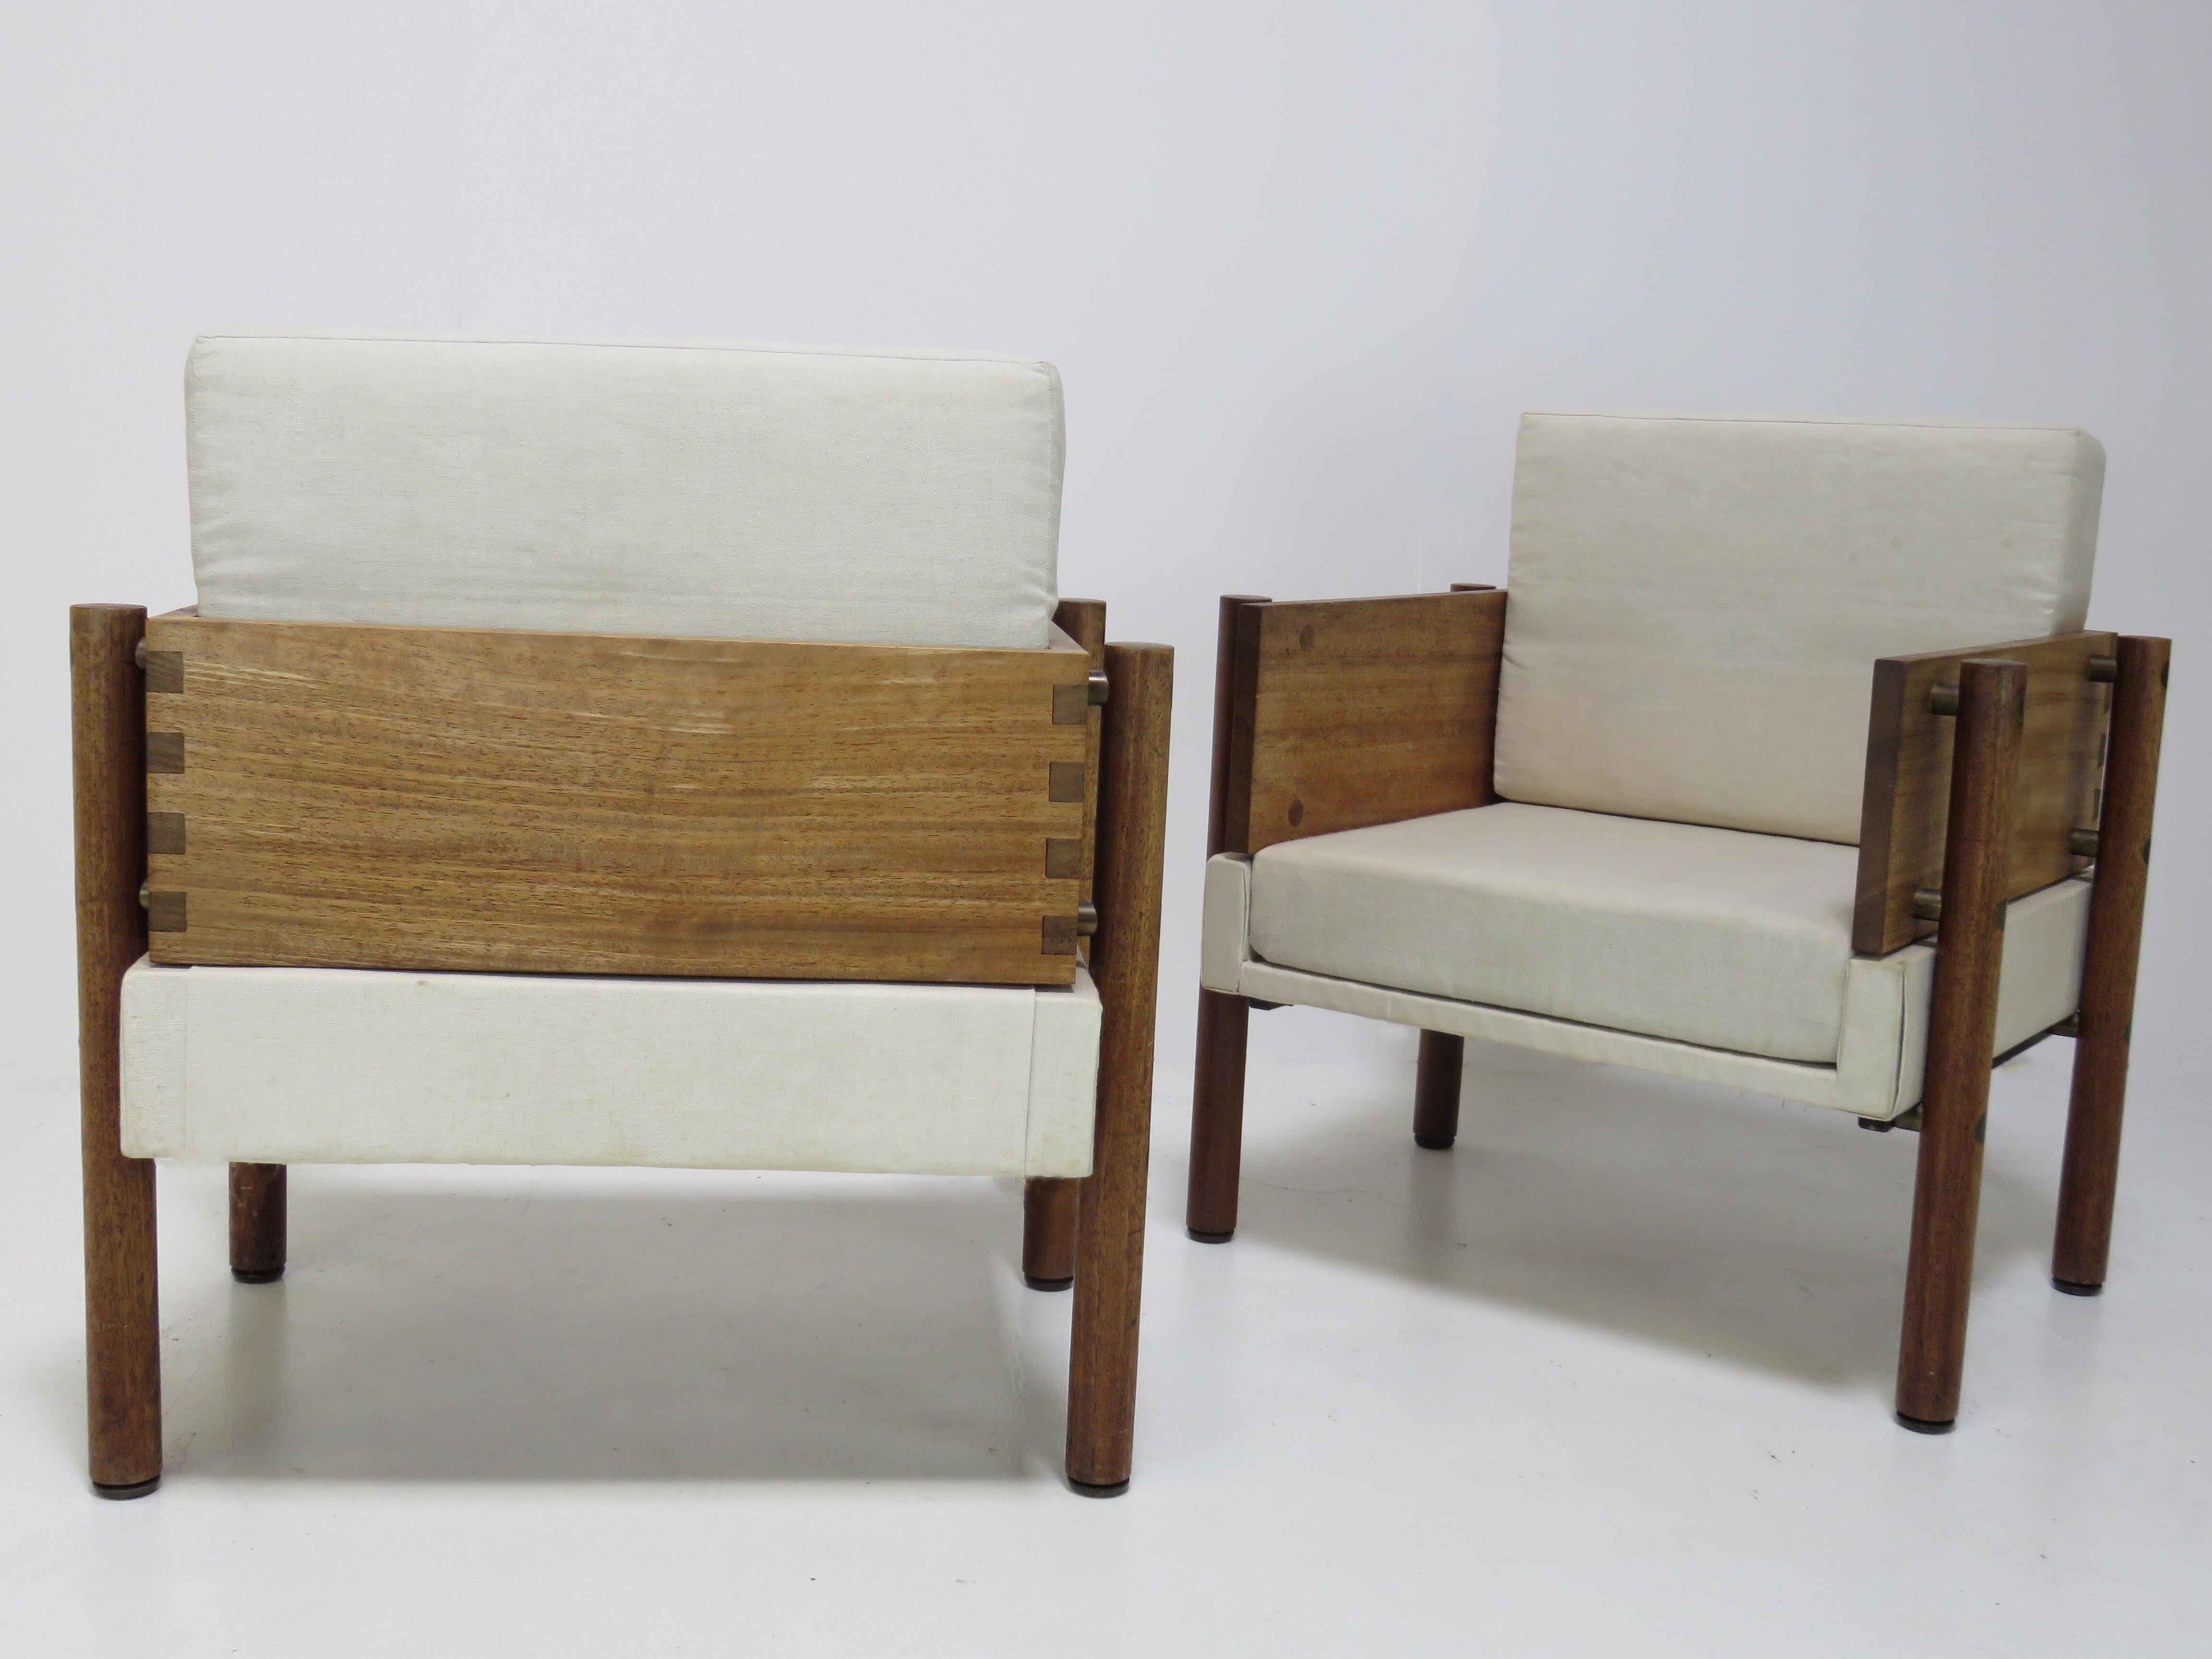 Scottish Architectural Pair of Chairs For Sale